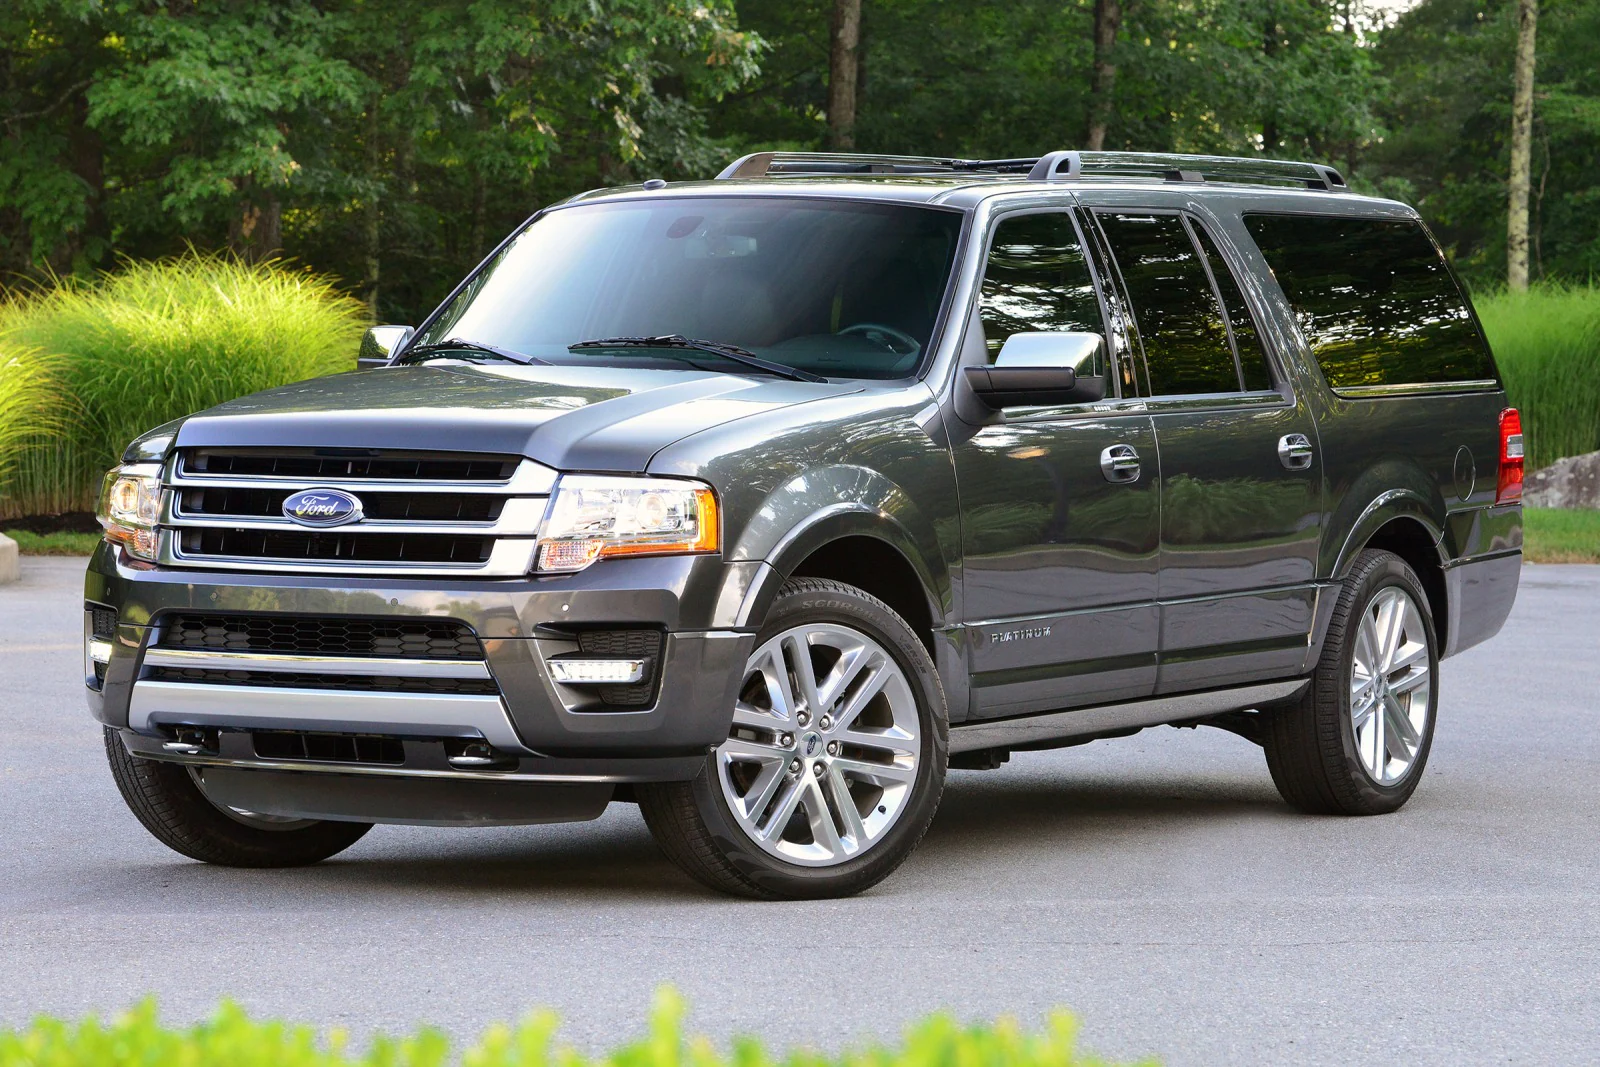 Don't Skip Service! 2017 Ford Expedition Maintenance Schedule Keeping up your 2017 Ford Expedition with regular maintenance